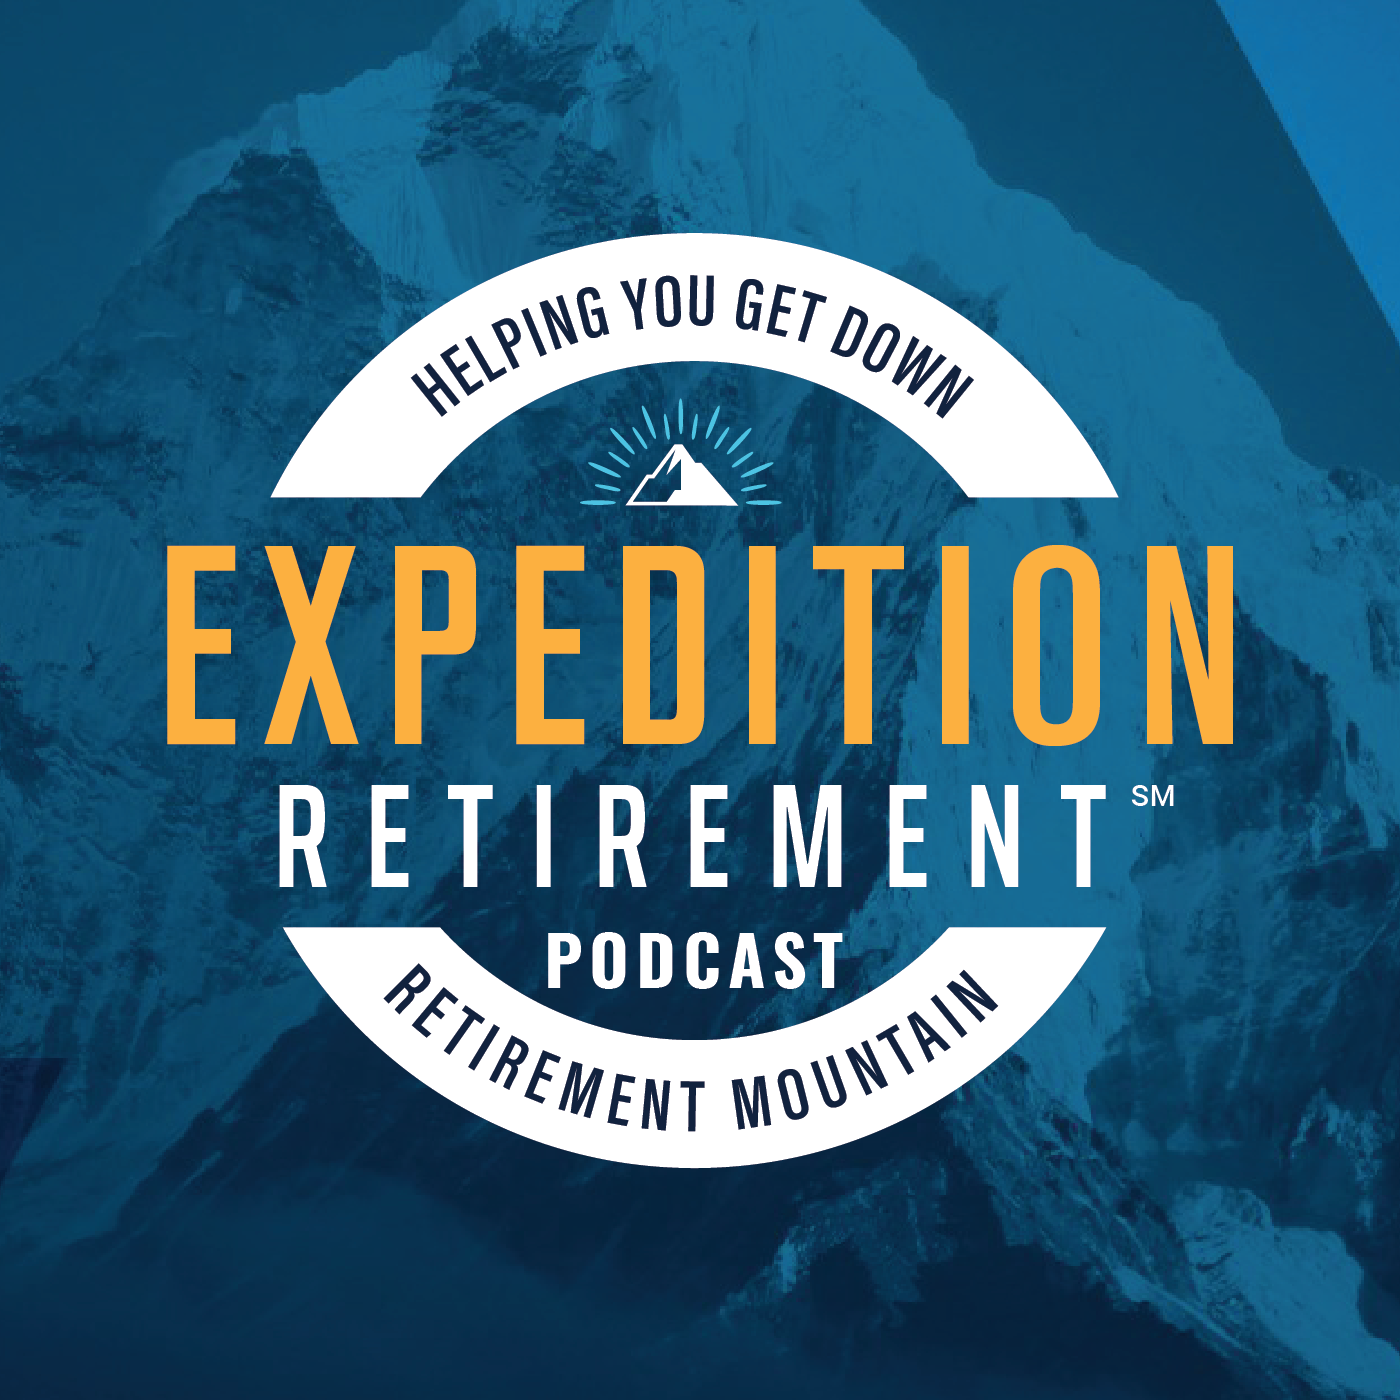 Estate Planning Attorney Tim Stallings talks about the legal documents you need and why | Is it possible to keep generational wealth going? | A new financial rule from Warren Buffett | Four Tell Tale signs you are too cheap in retirement